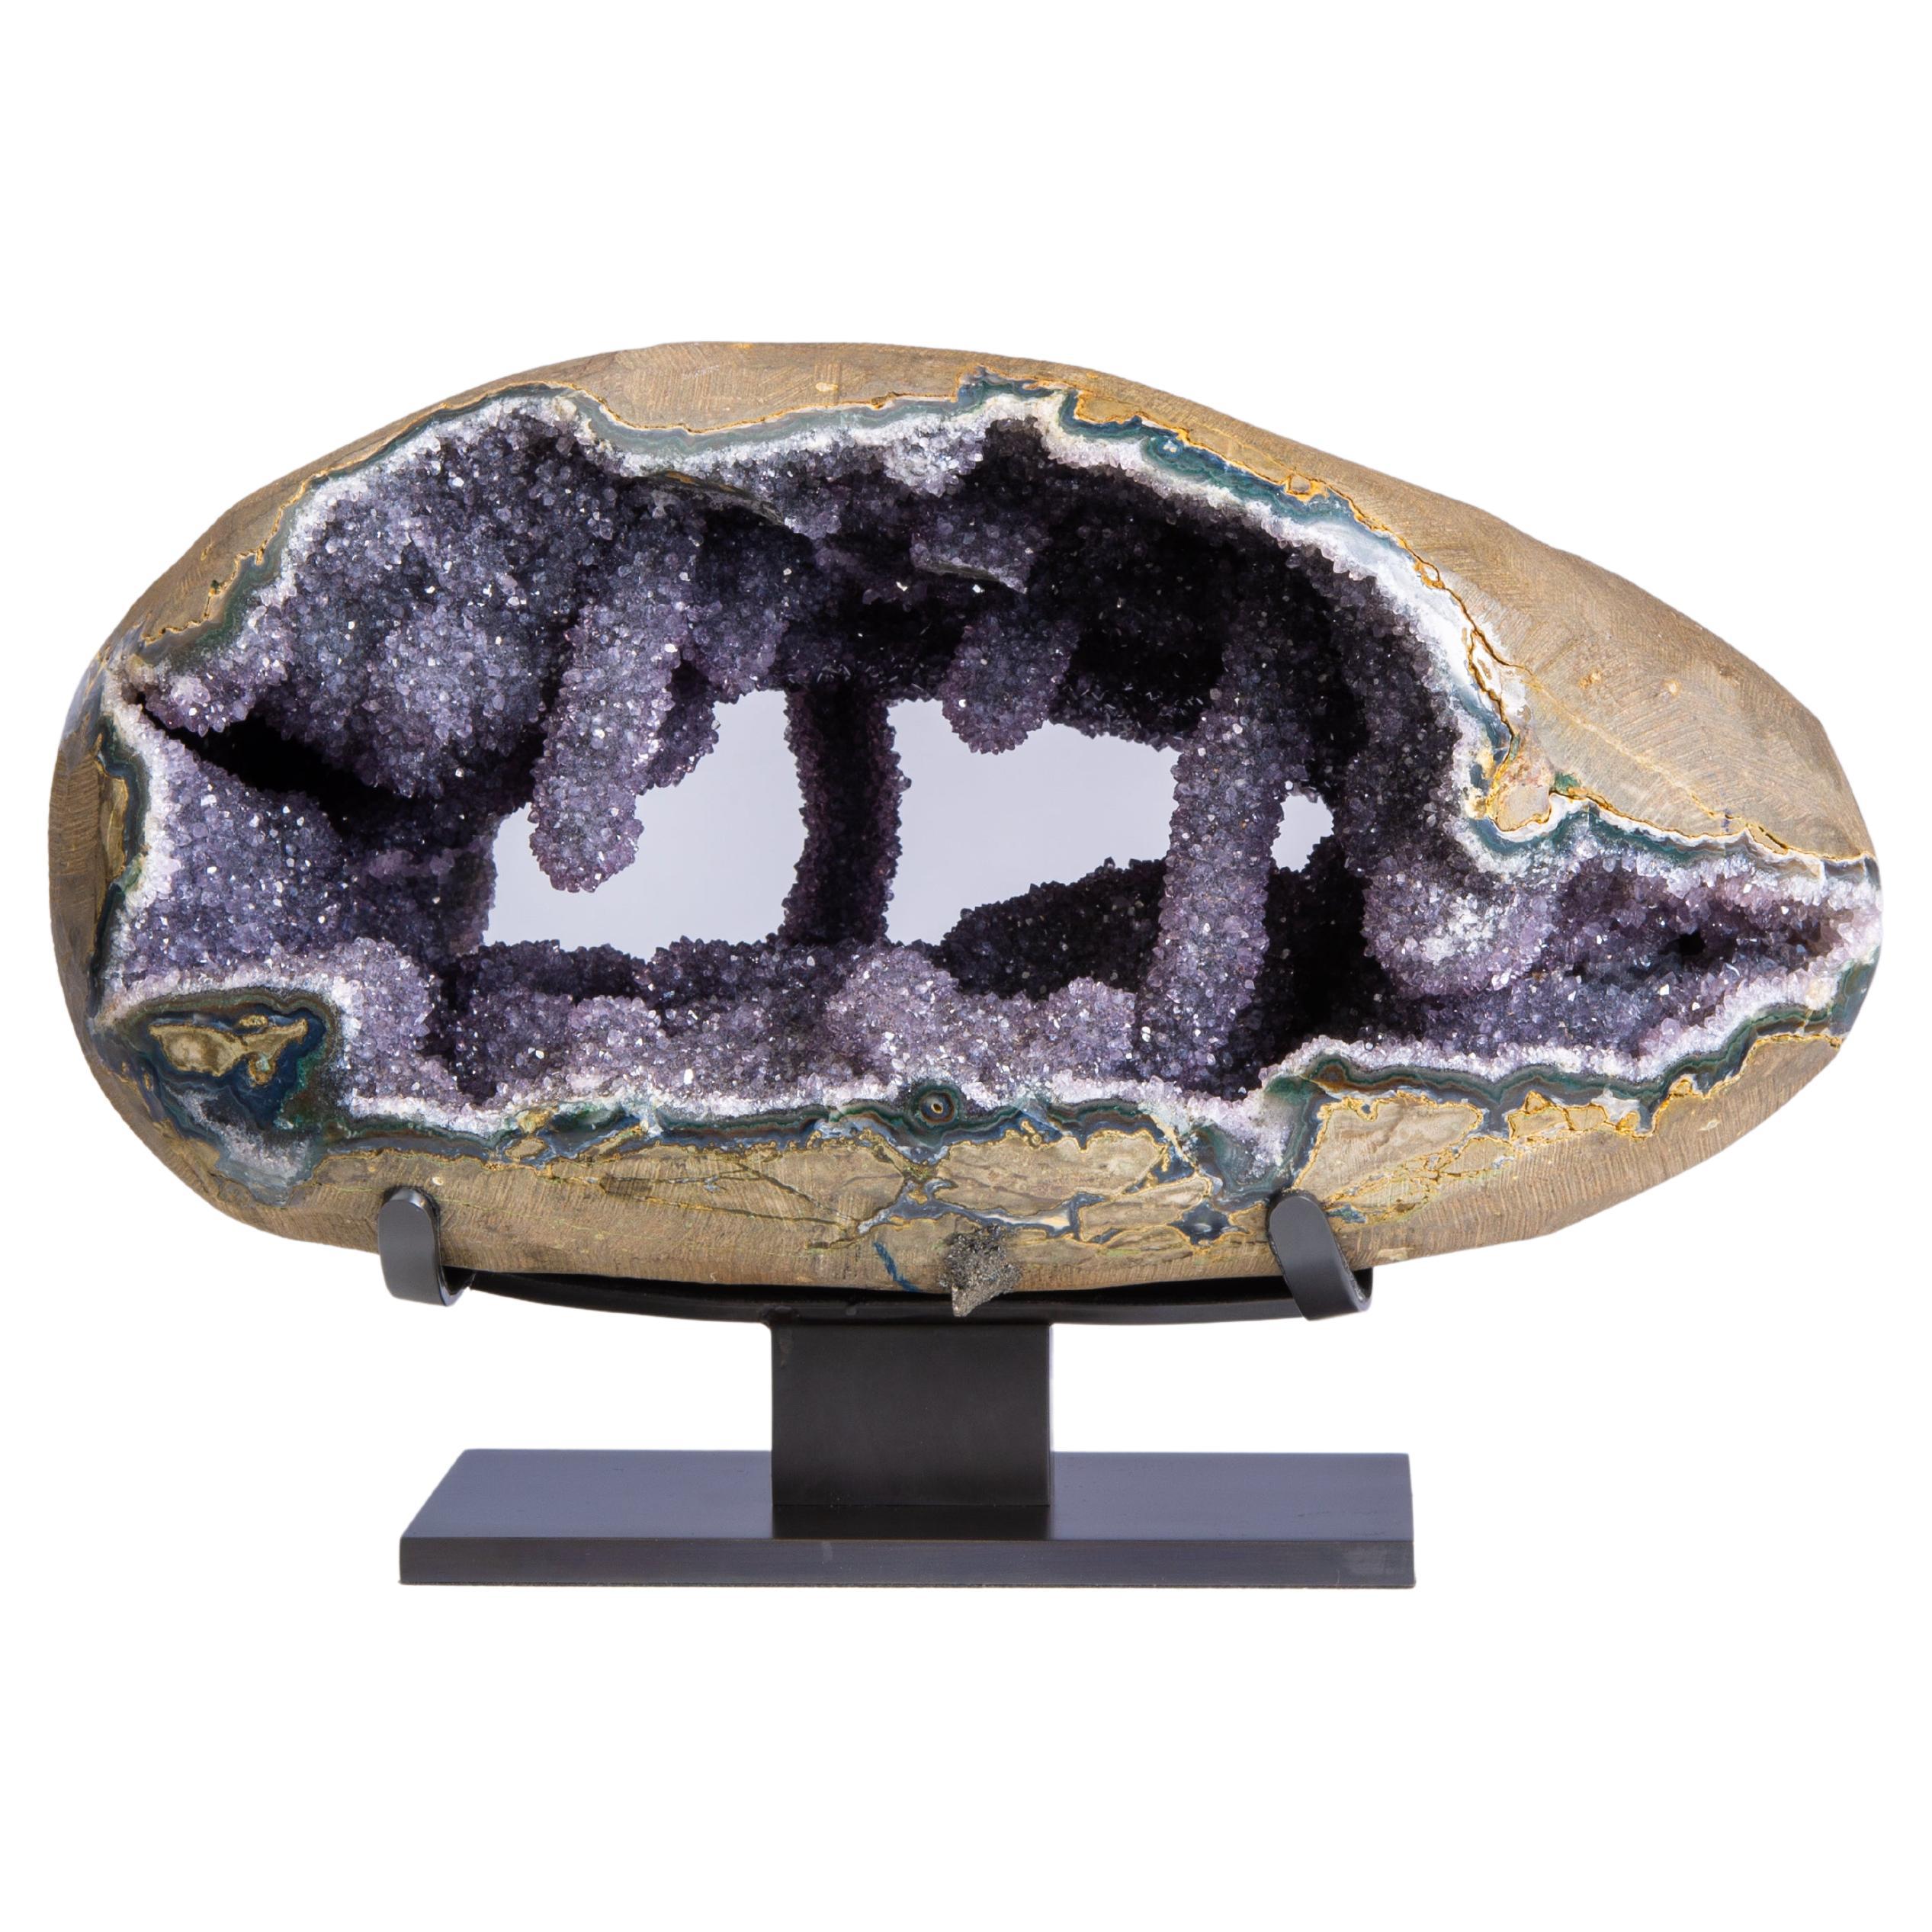 Amazing Geode with Stalactites and Stalagmites with Amethyst and Grey Druze